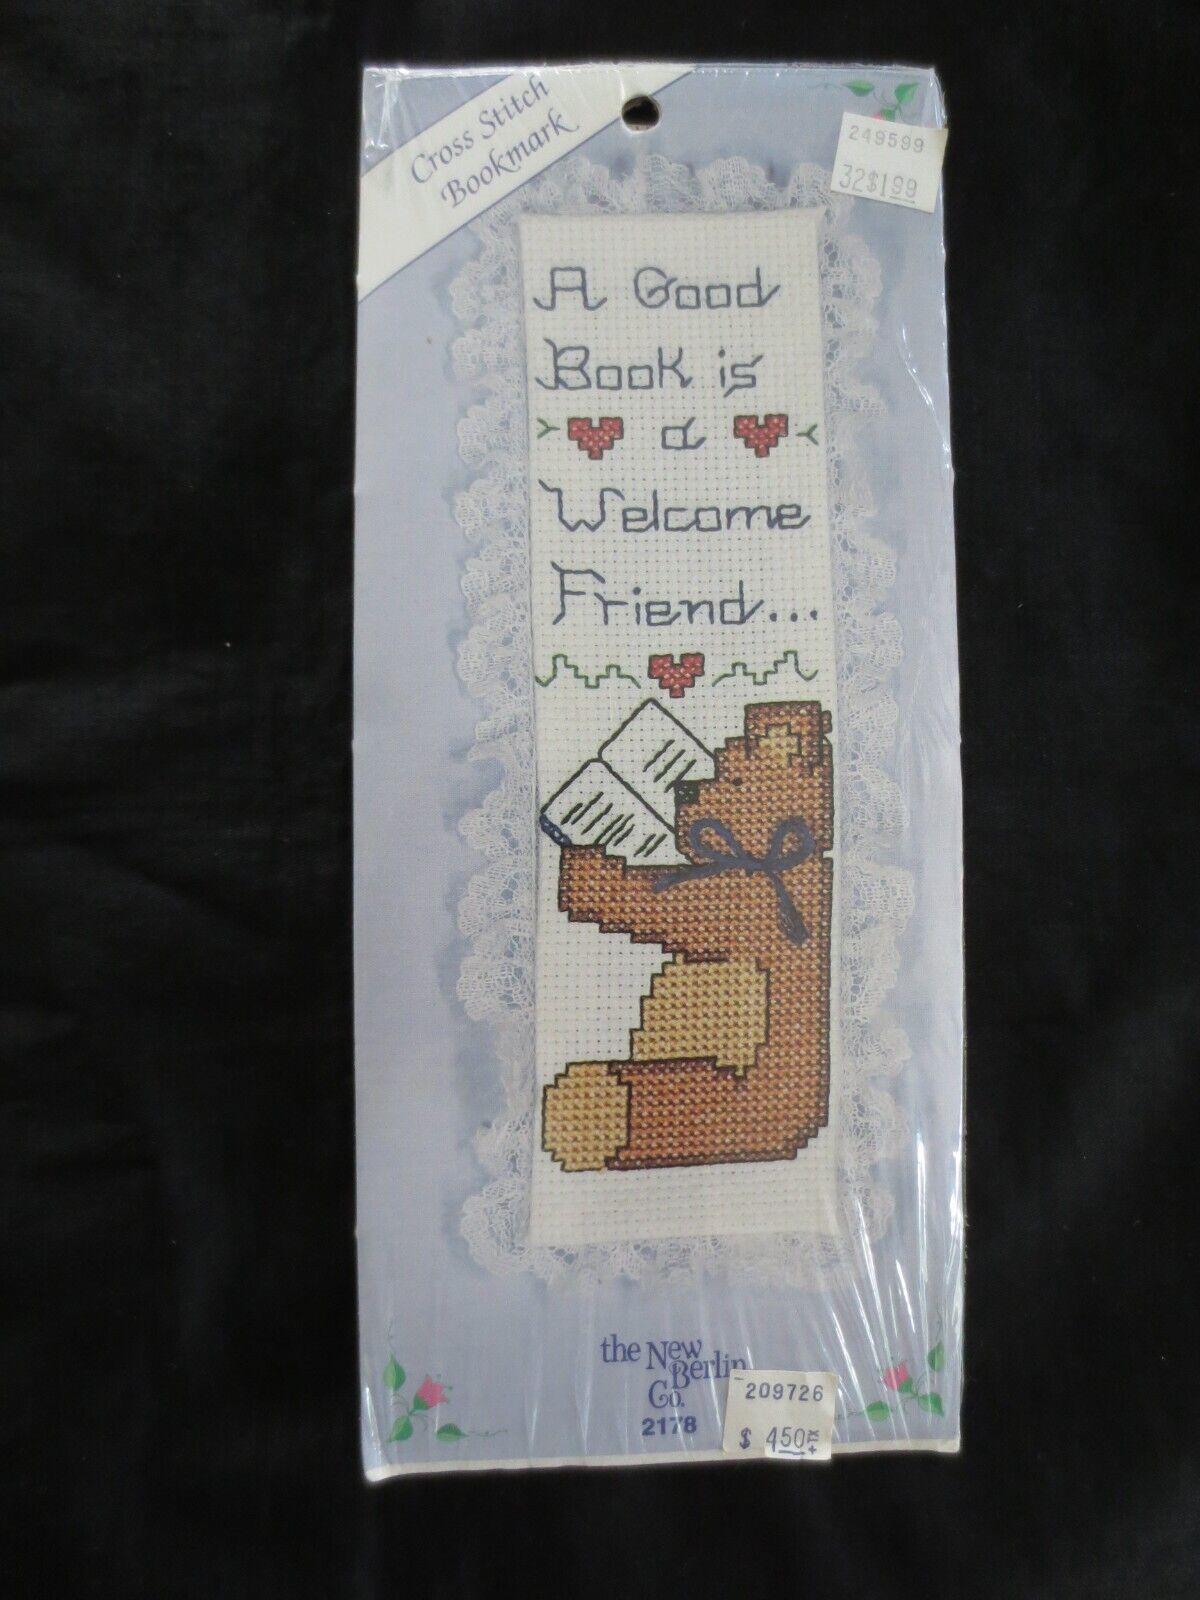 The New Berlin Co A GOOD BOOK IS A WELCOME FRIEND Counted Cross Stitch KIT #2178 - $6.00